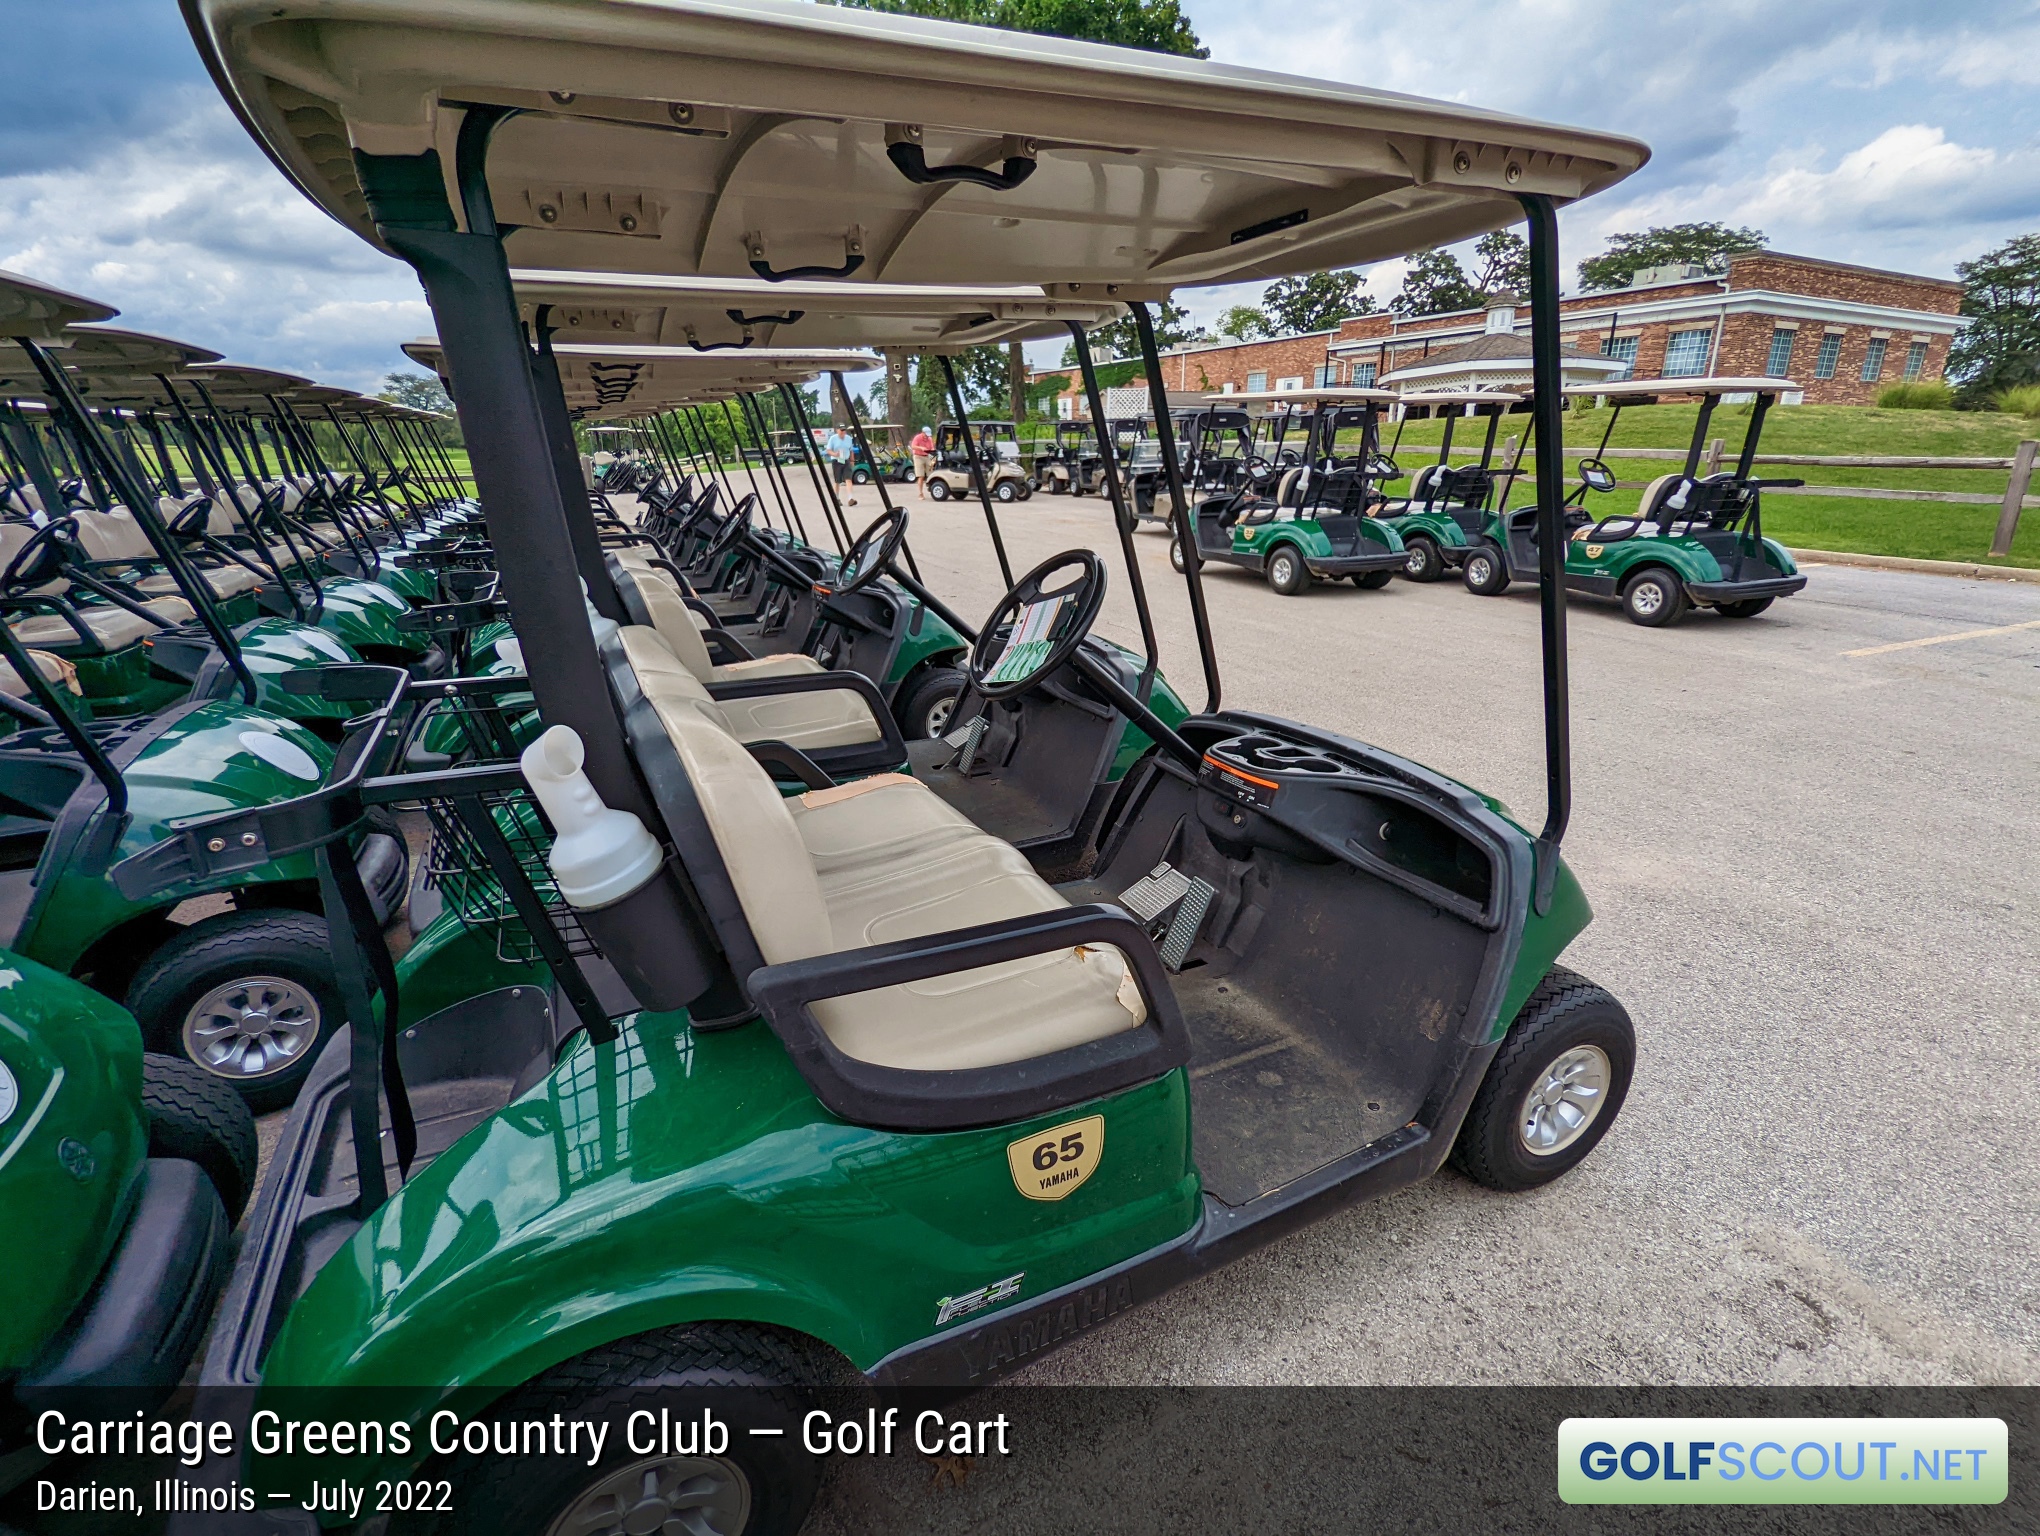 Photo of the golf carts at Carriage Greens Country Club in Darien, Illinois. 